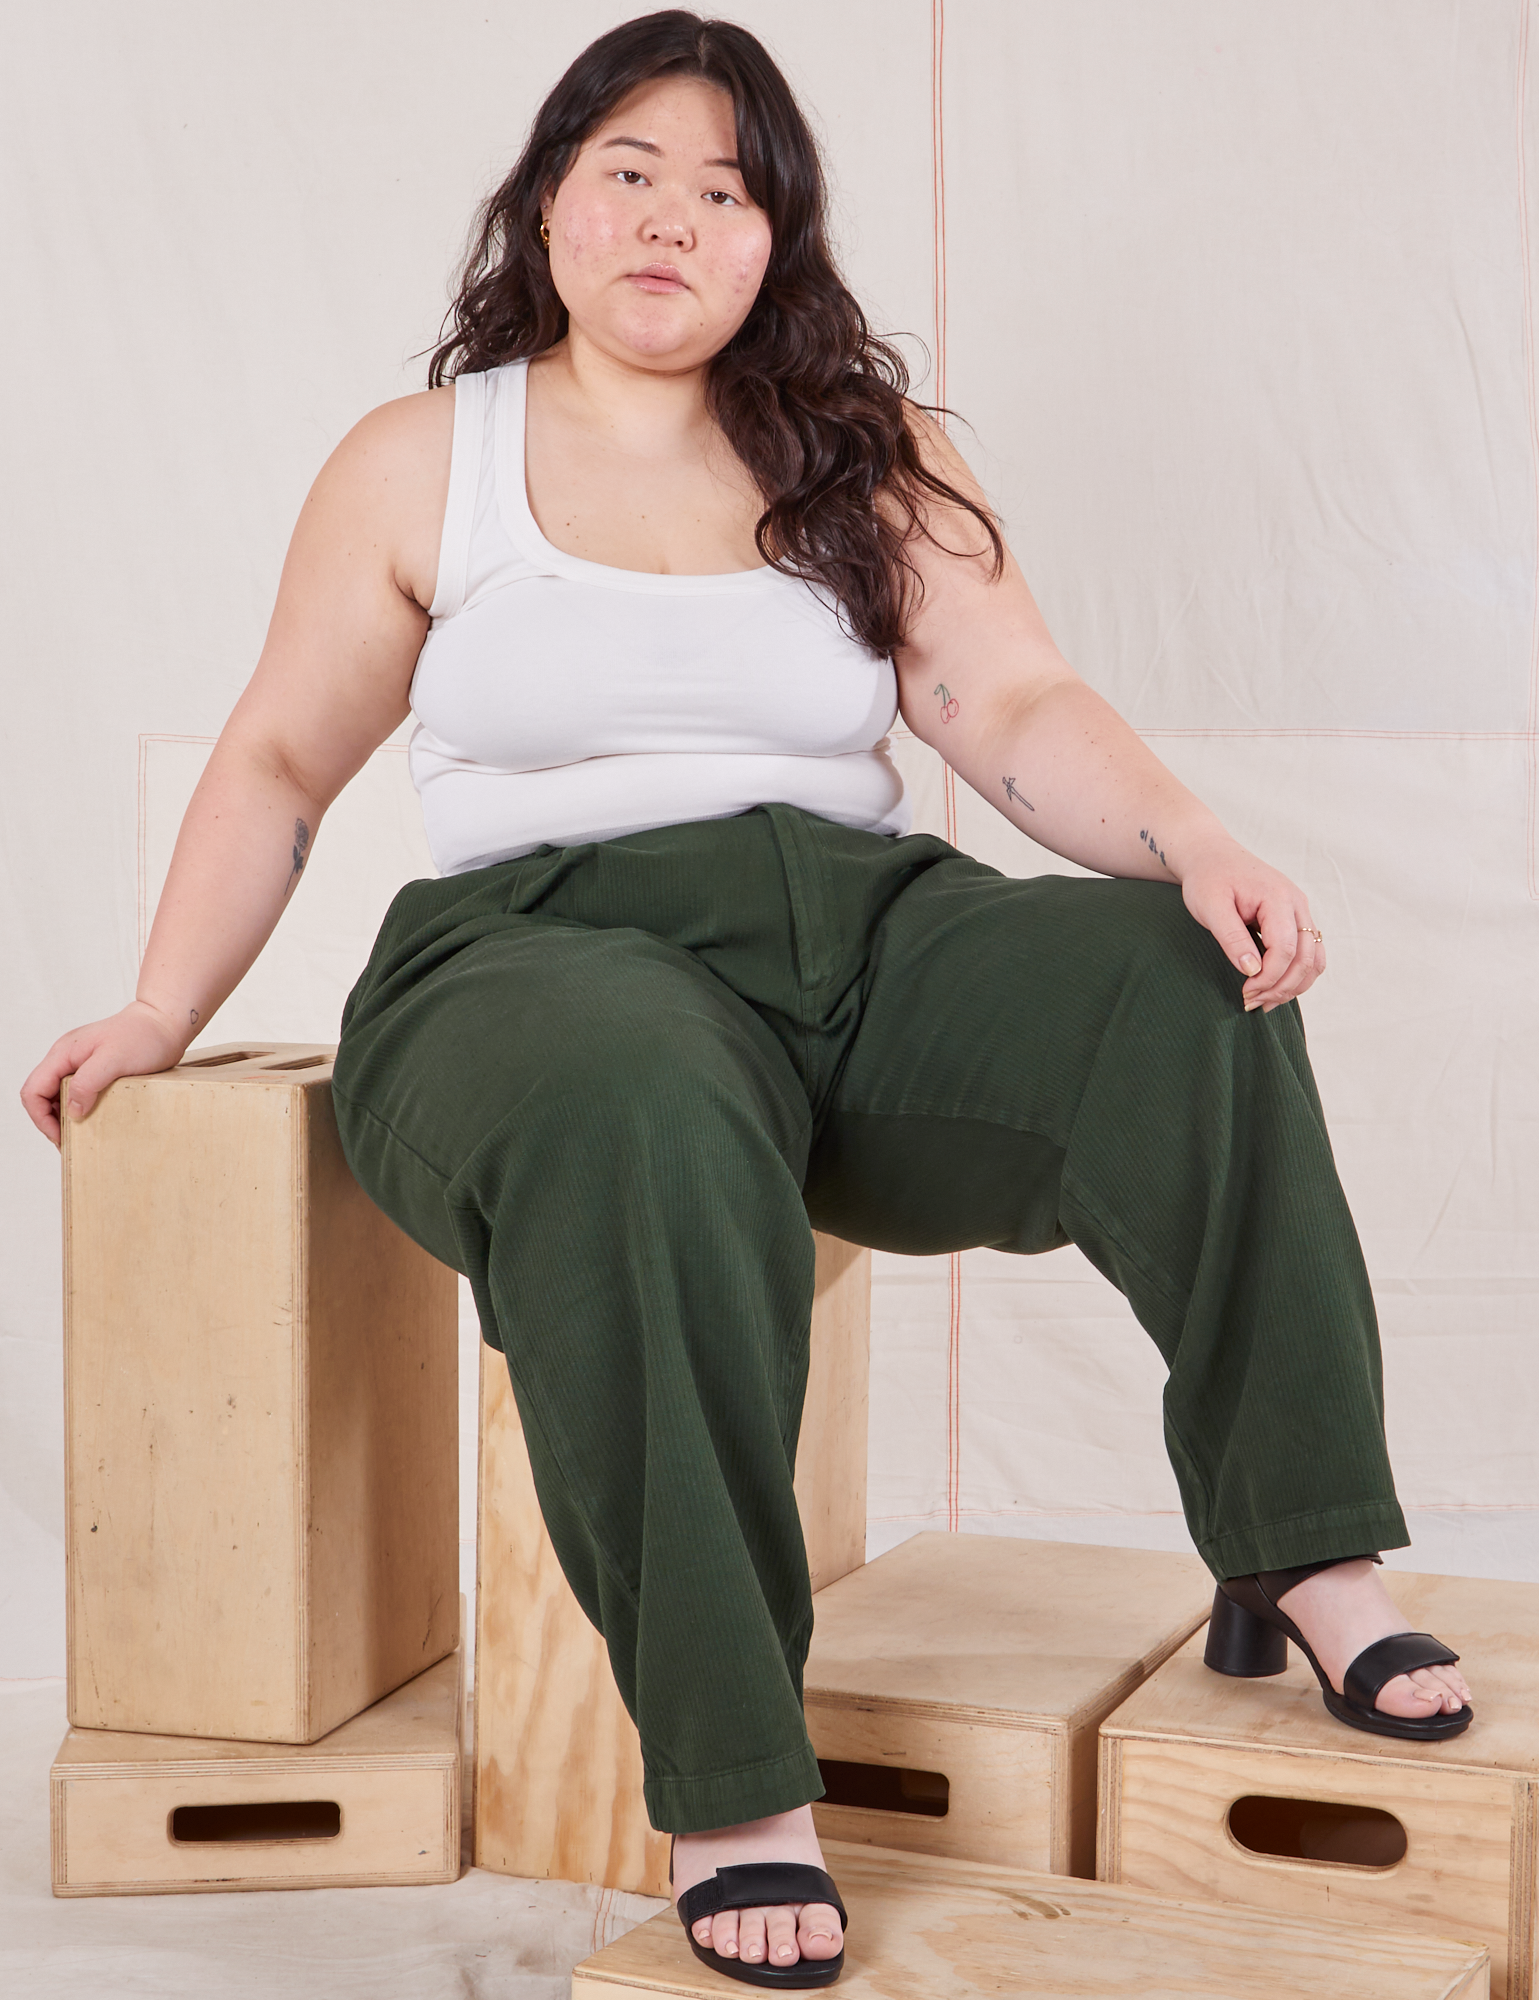 Ashley is wearing Heritage Trousers in Swamp Green and vintage off-white Cropped Tank Top